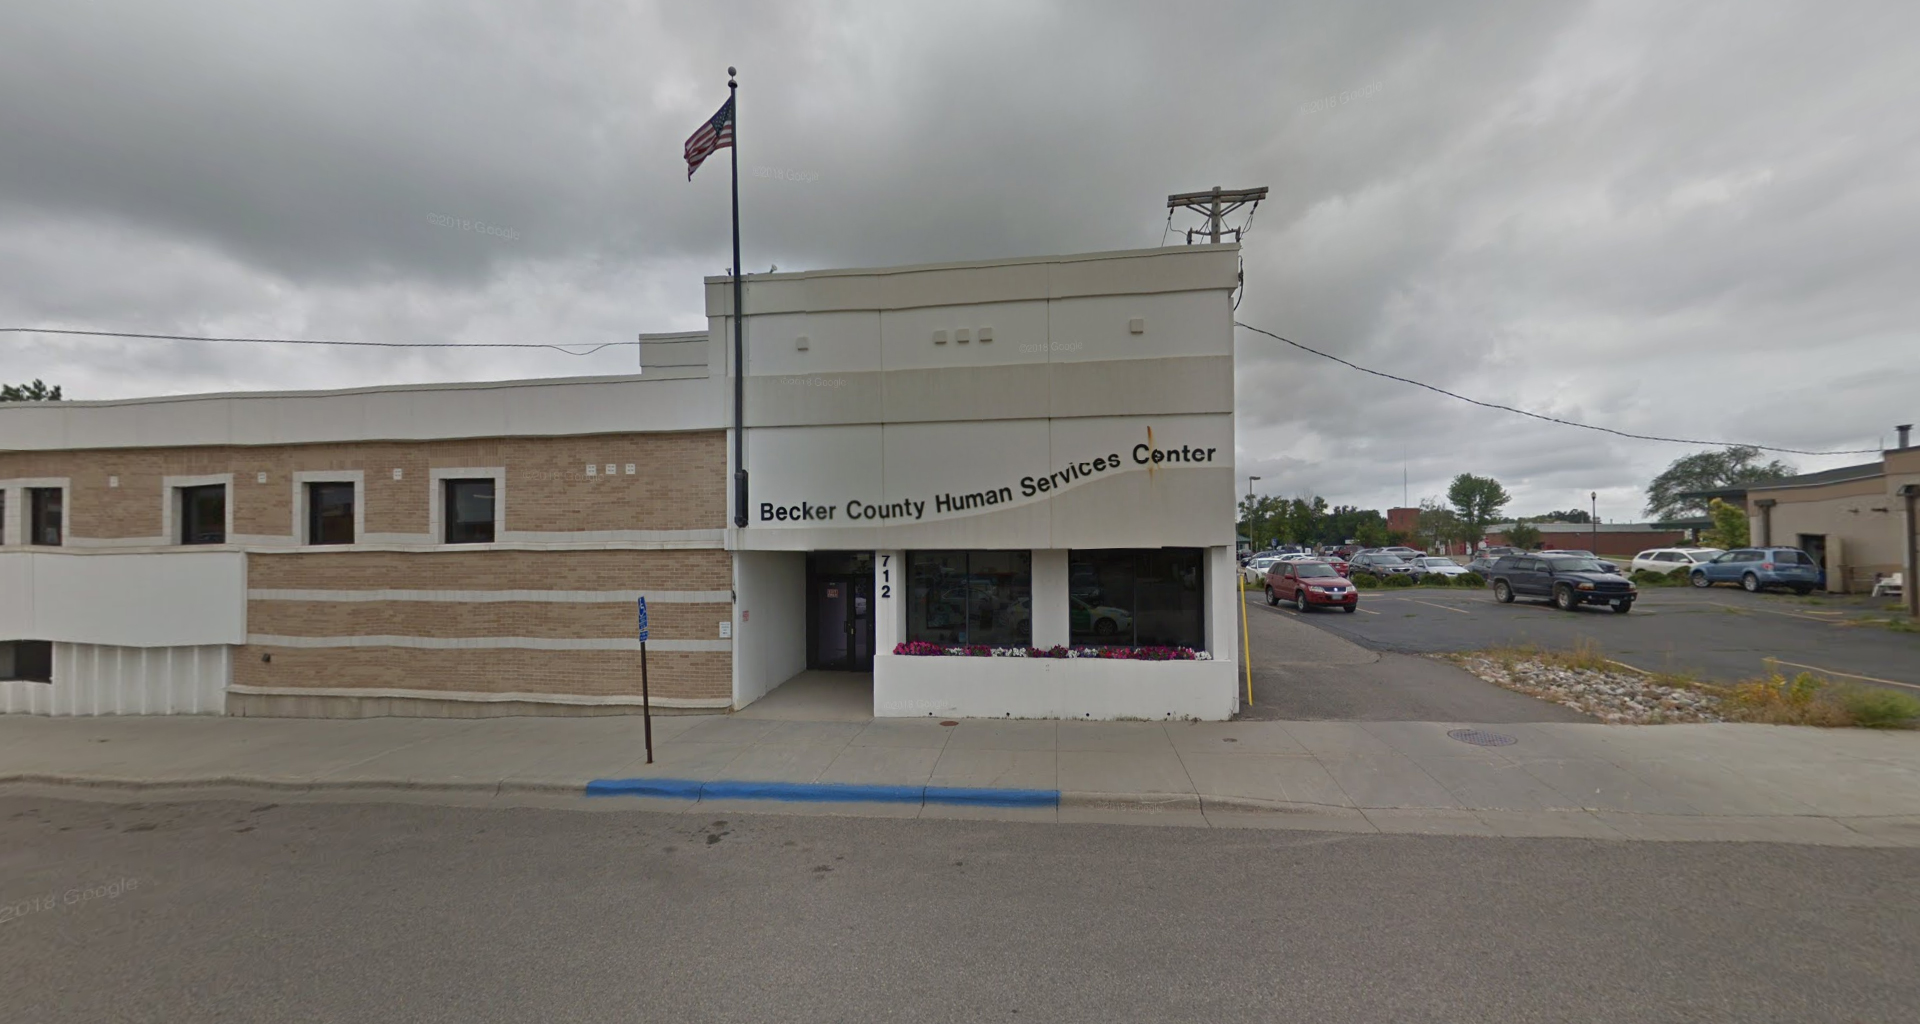 Becker County Human Services